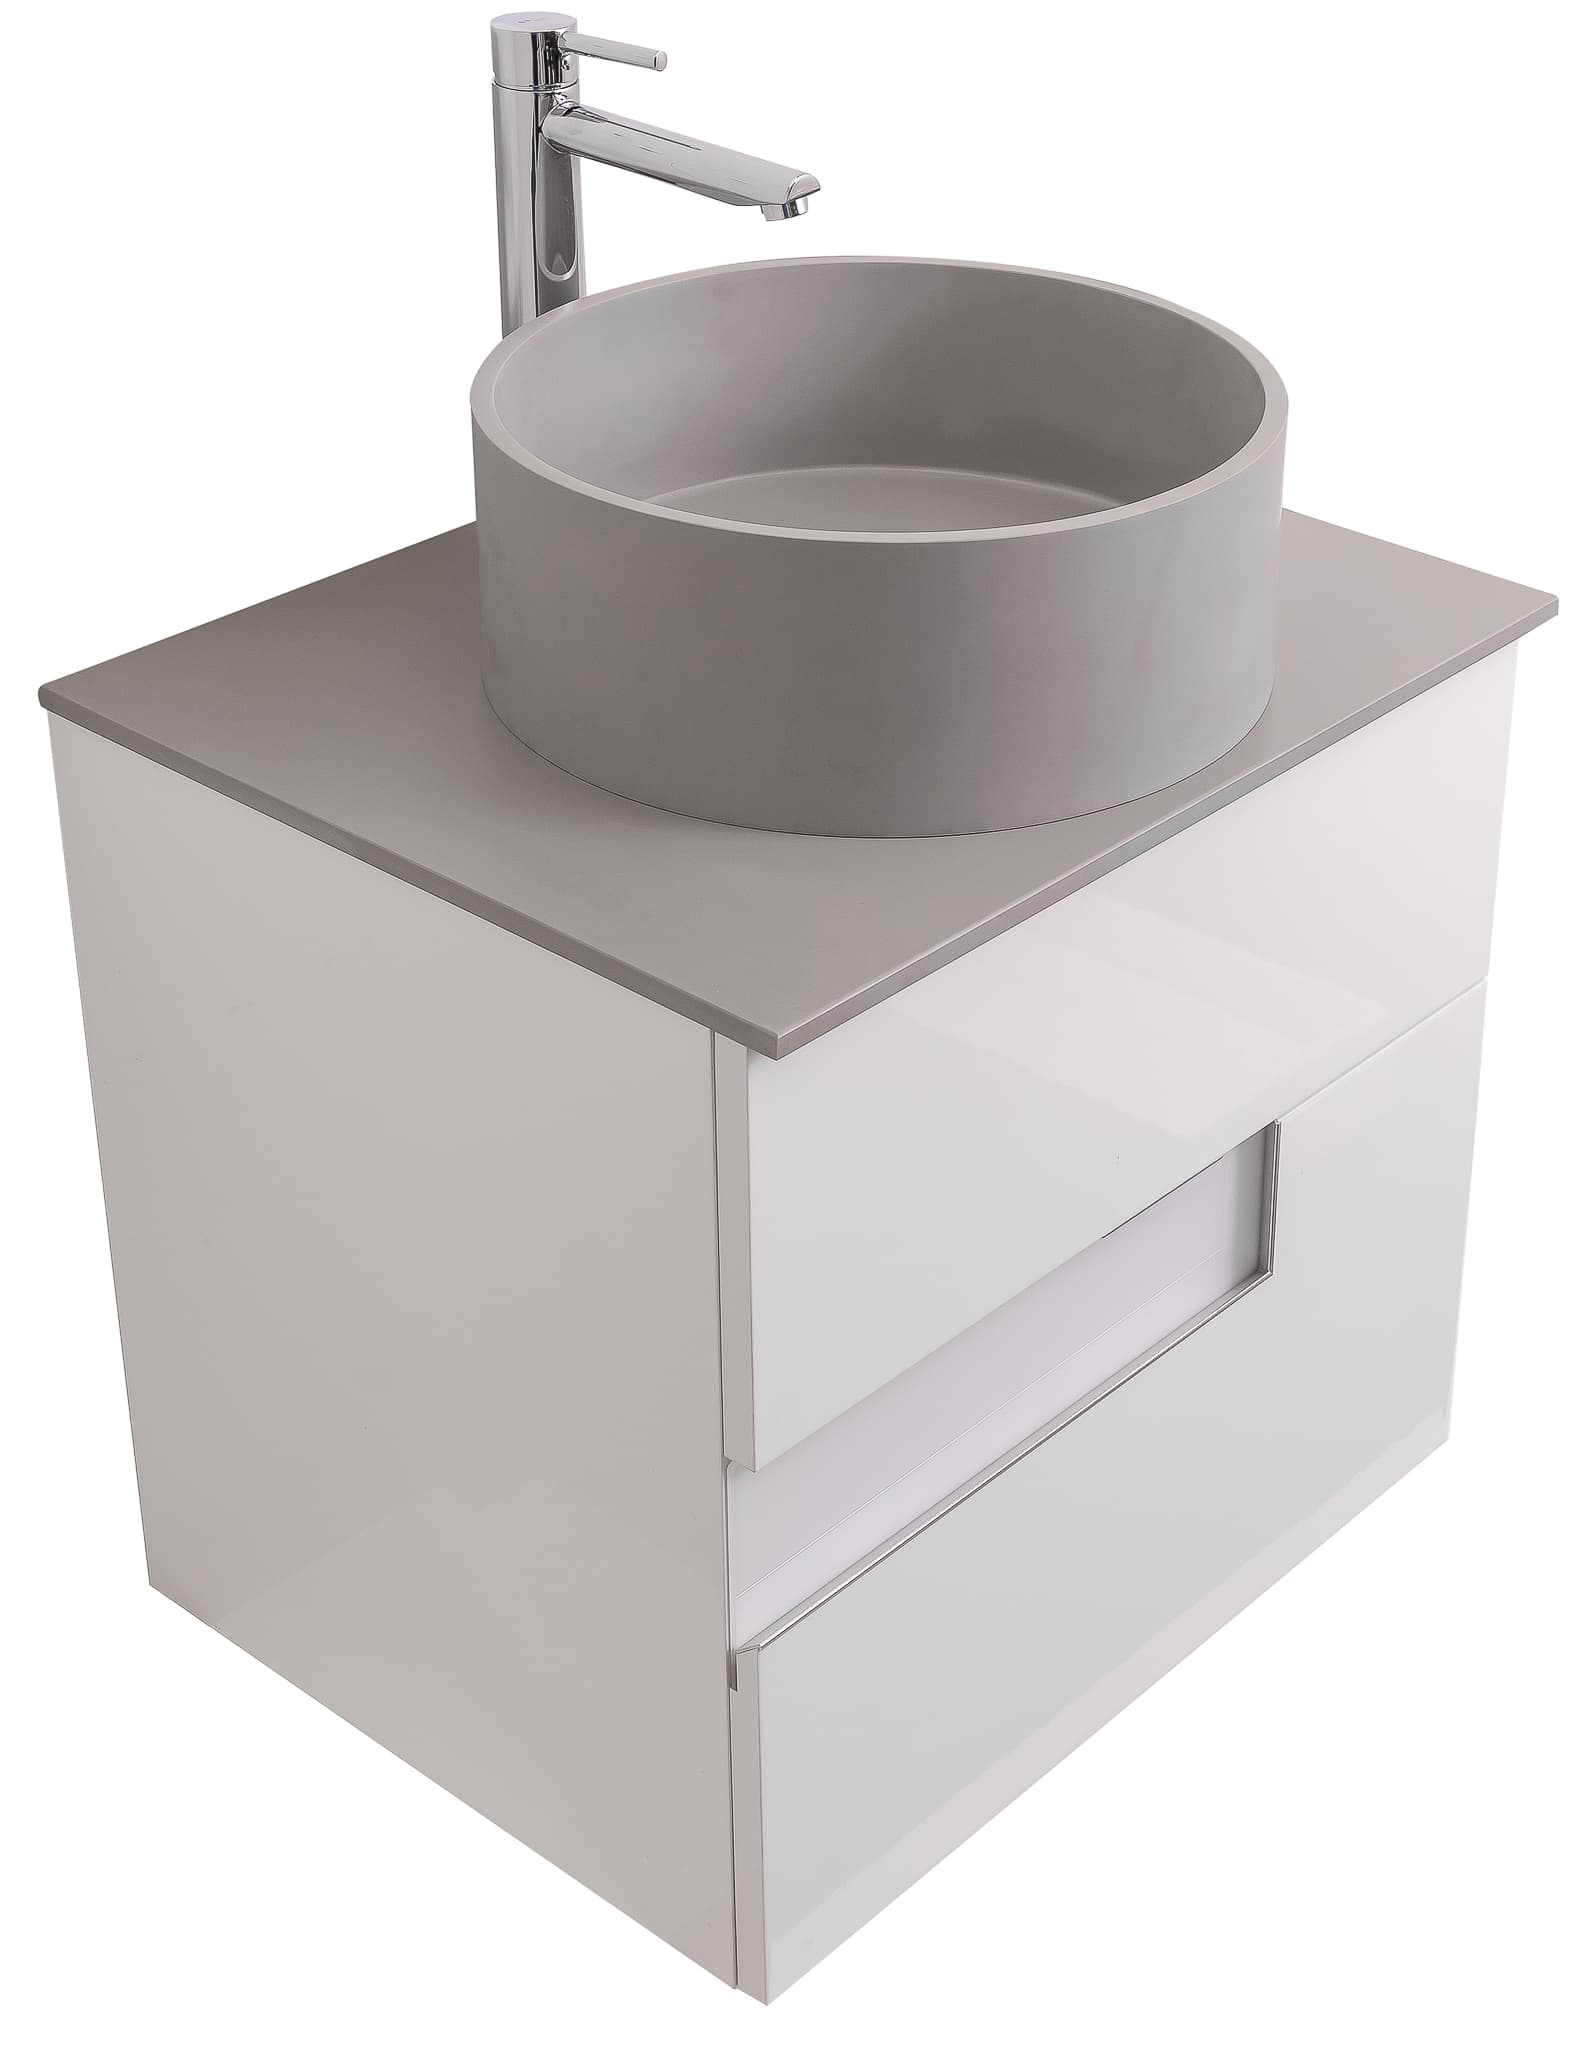 Vision 23.5 White High Gloss Cabinet, Solid Surface Flat Grey Counter And Round Solid Surface Grey Basin 1386, Wall Mounted Modern Vanity Set